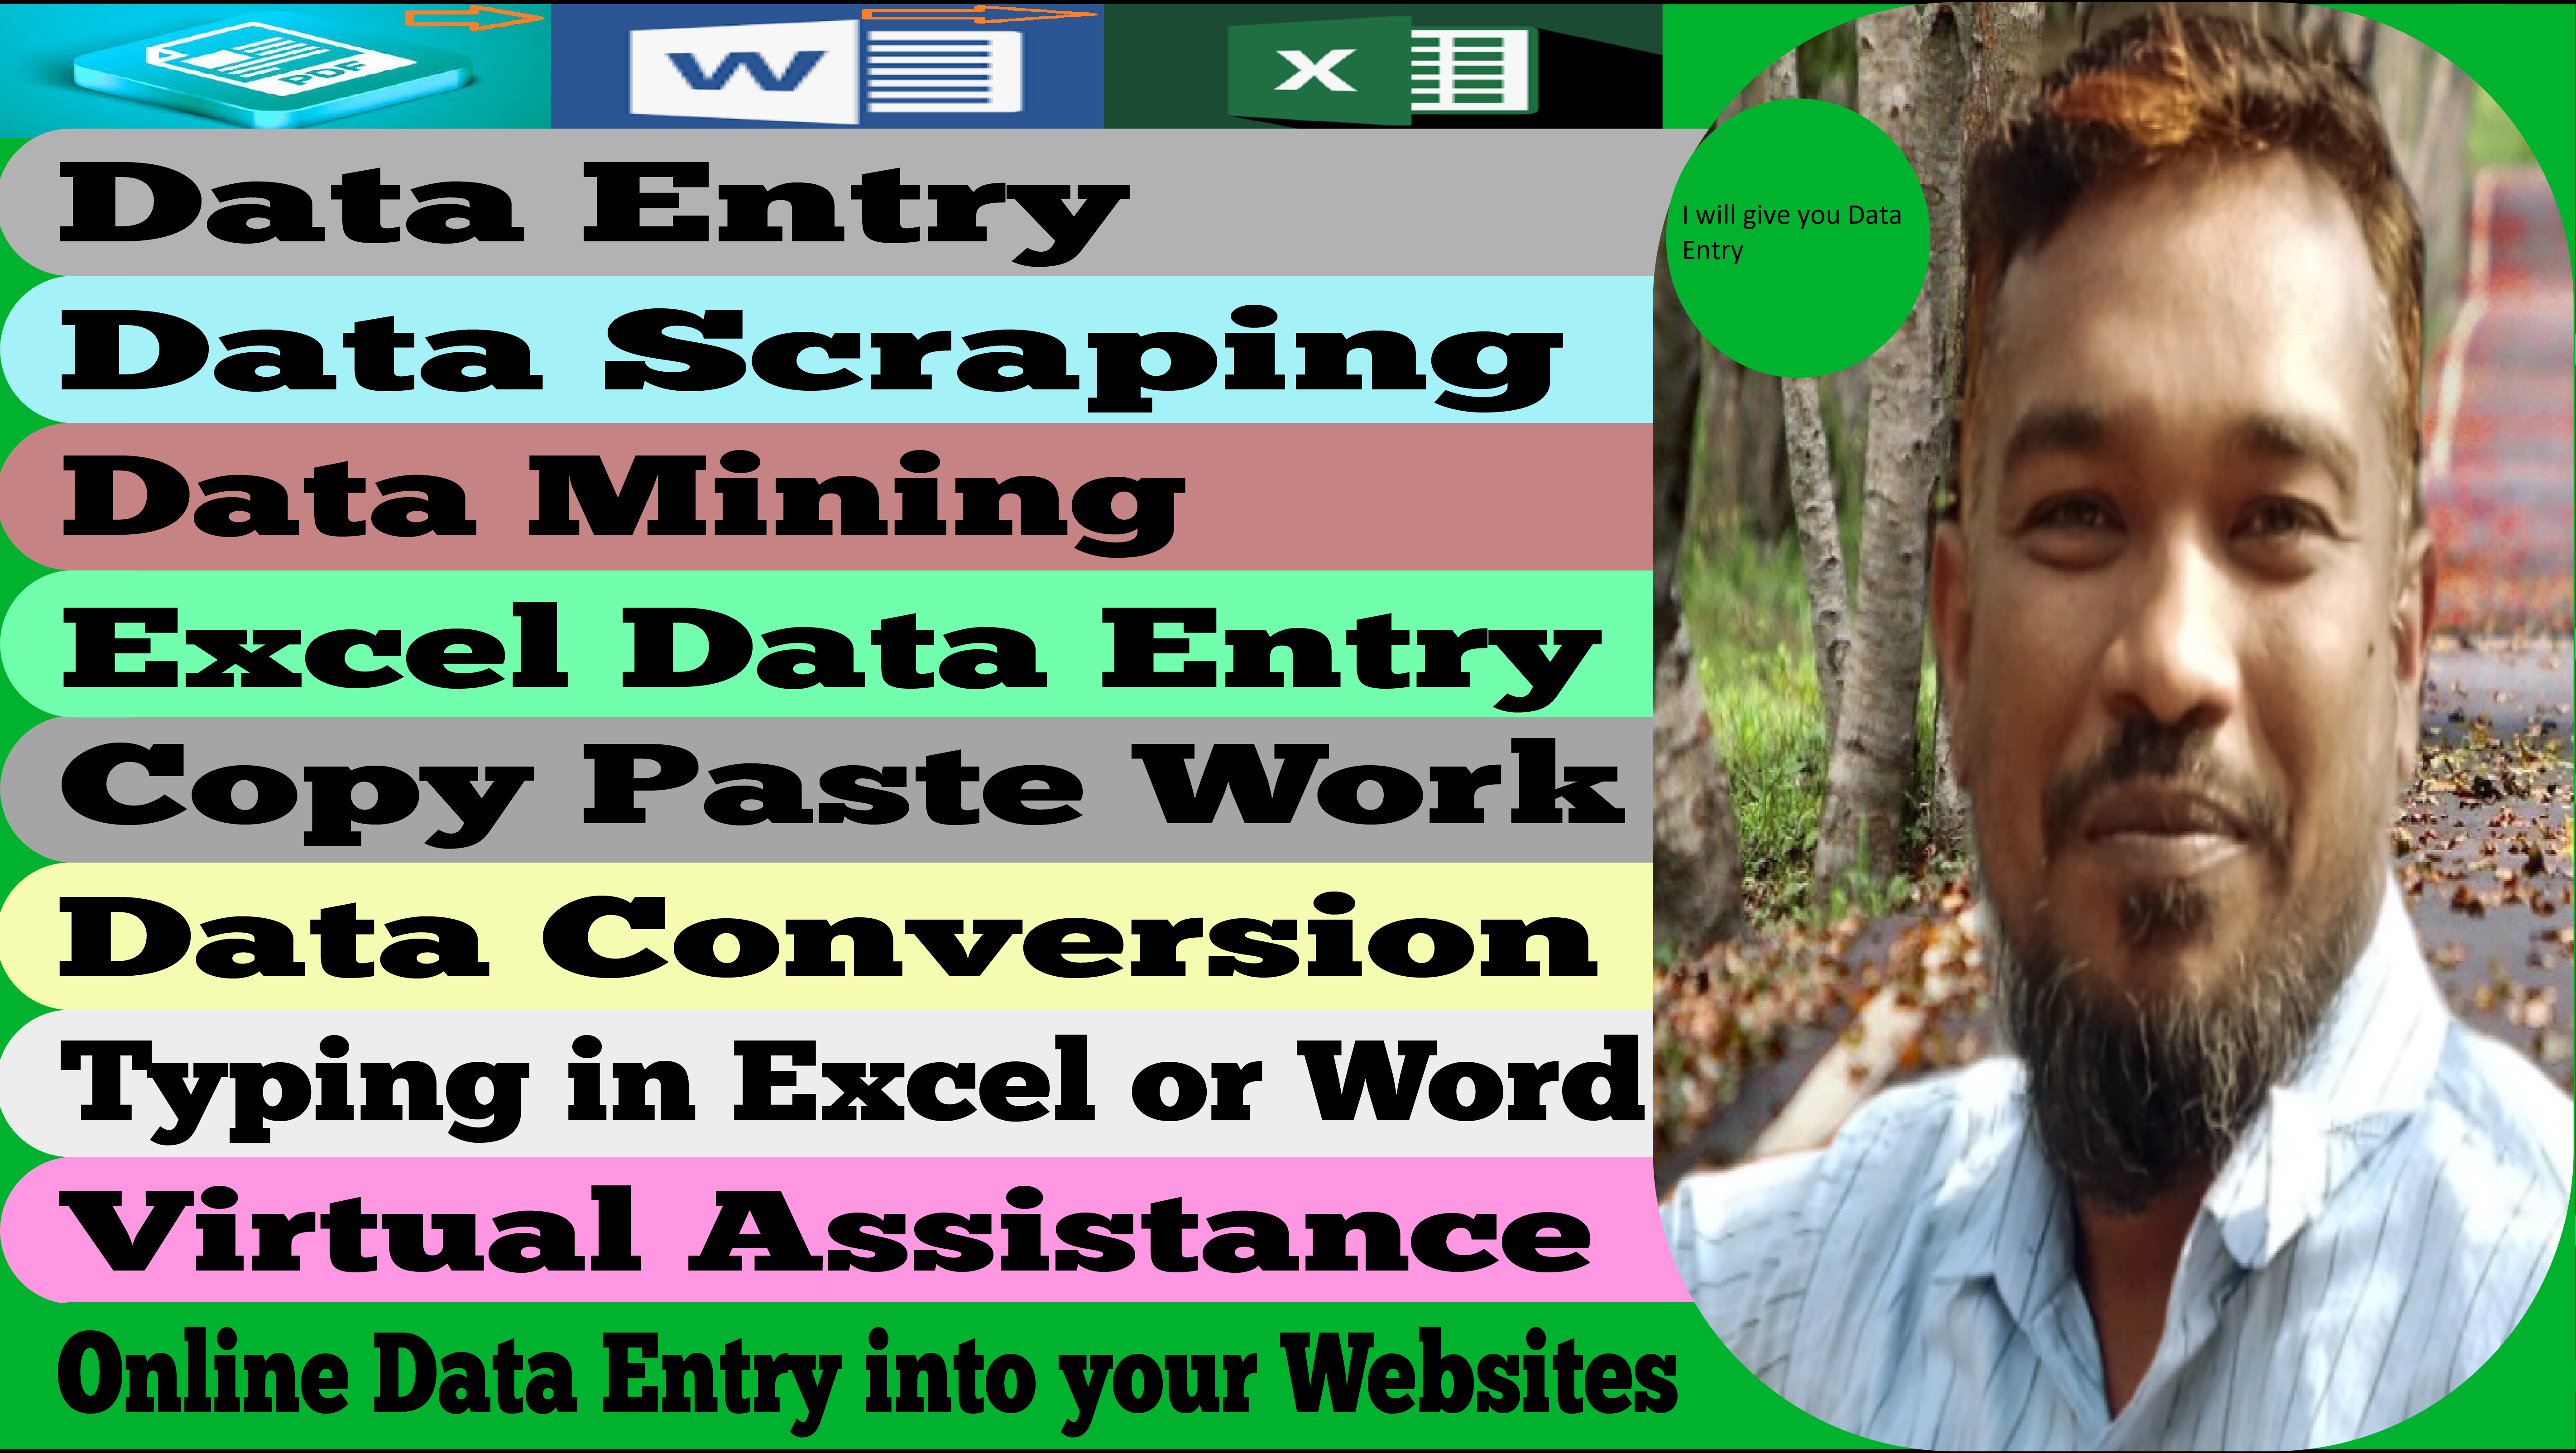 I will give you data entry, your data collection,copy paste,excel data entry in one day